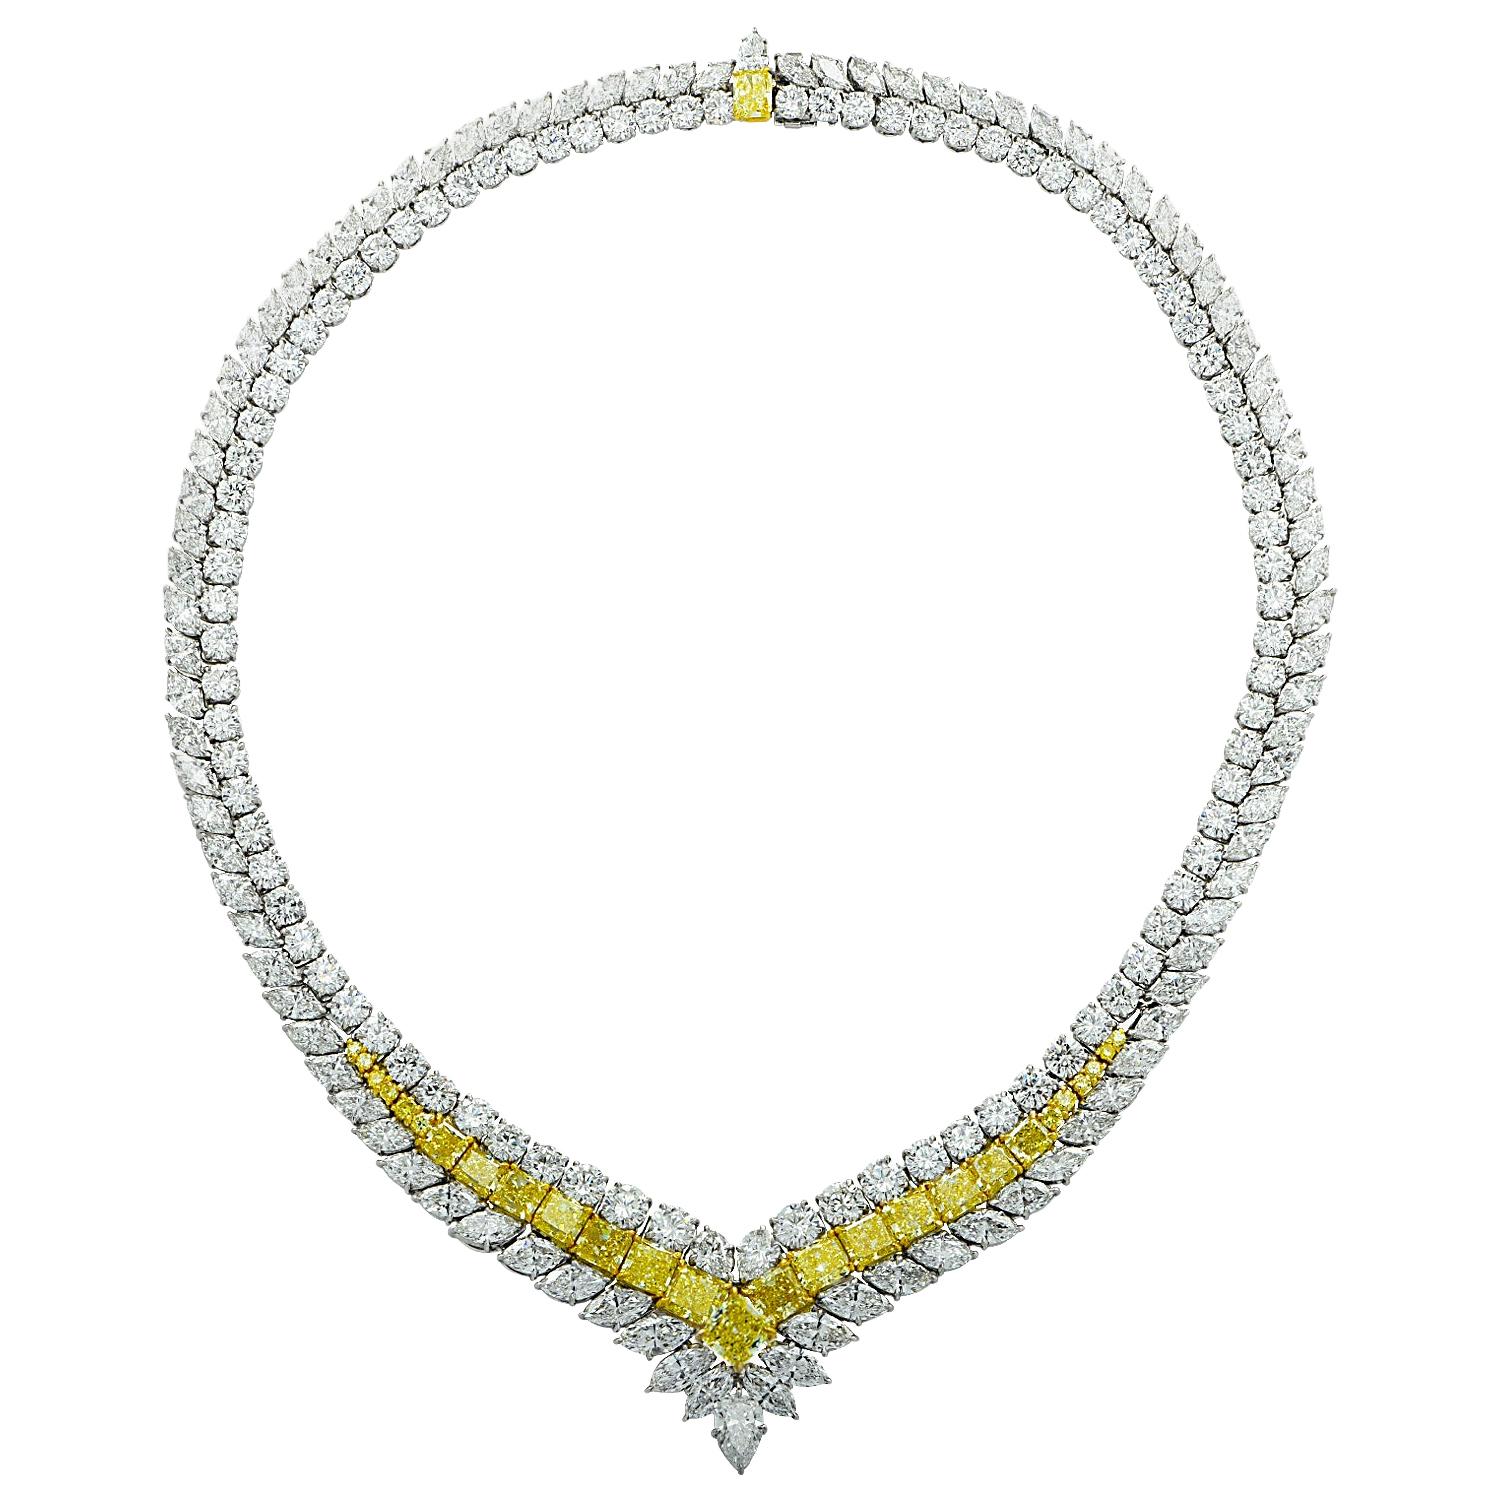 80.81 Carat GIA Certified Fancy Intense Yellow and White Diamond Necklace